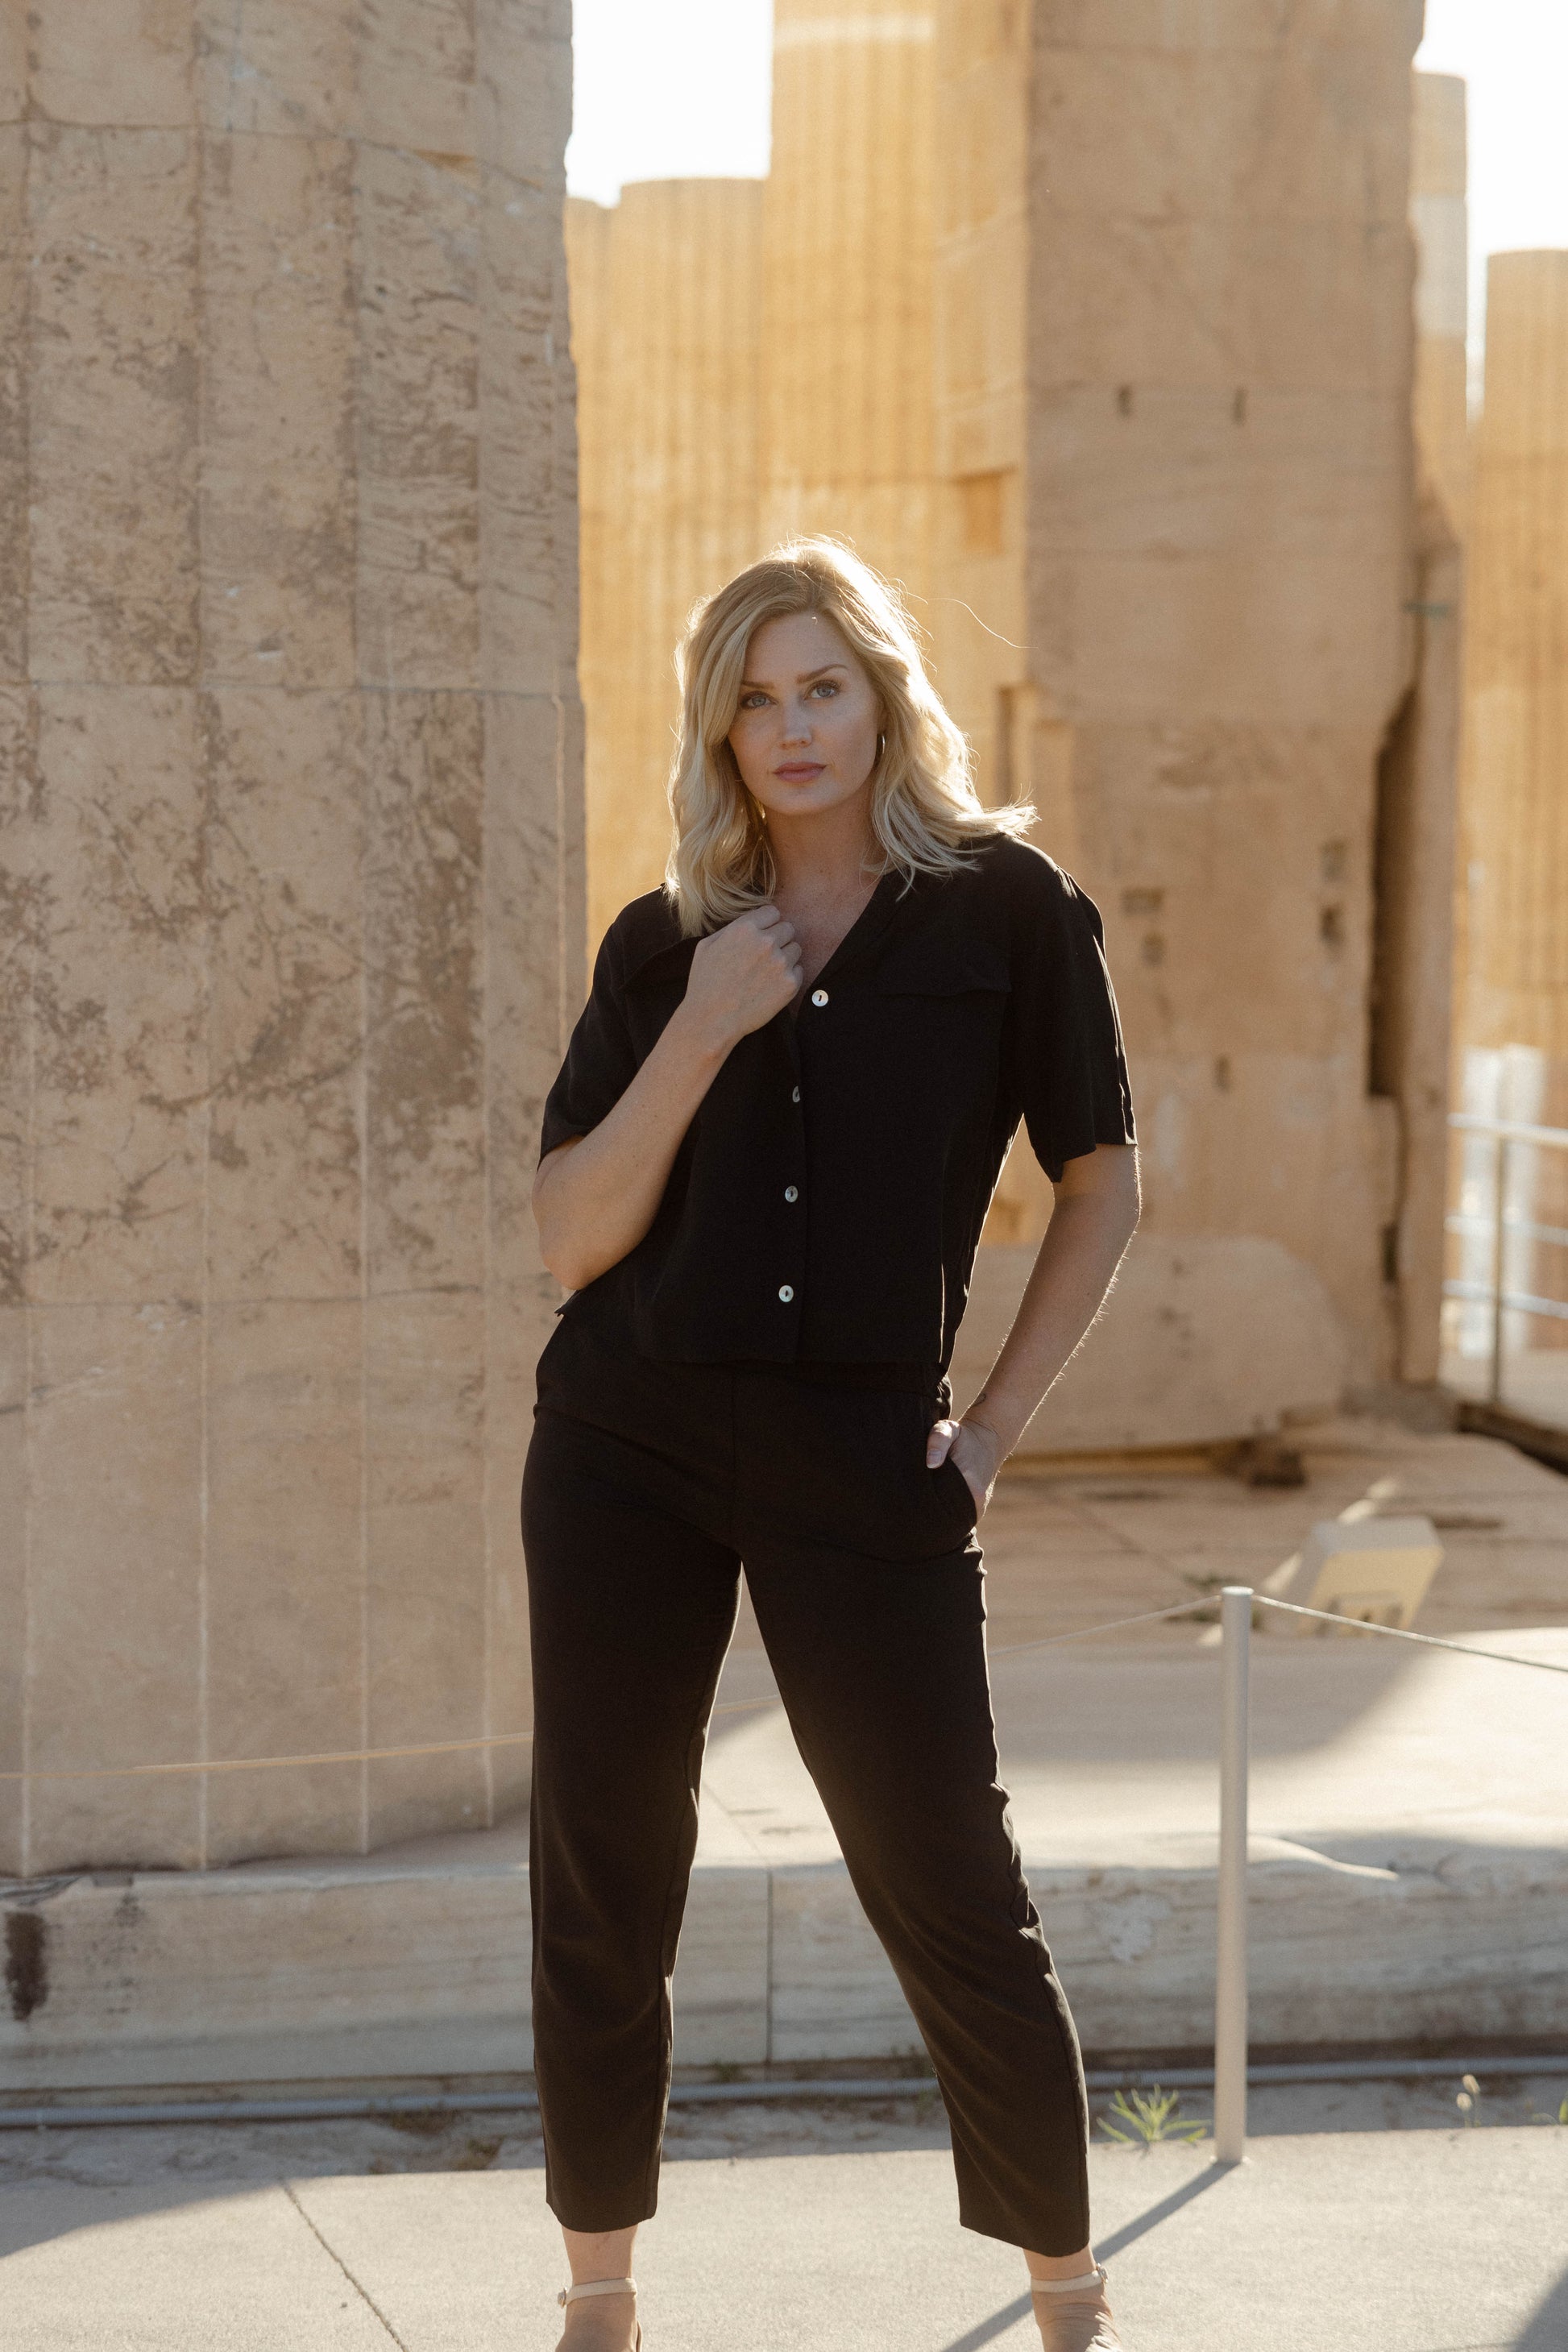 The Chloe is a versatile pull-on trouser with a straight leg silhouette that’s easy to dress up or down. These pants are made from 100% Tencel and have straight legs that hit just above the ankle, giving the illusion of taller 